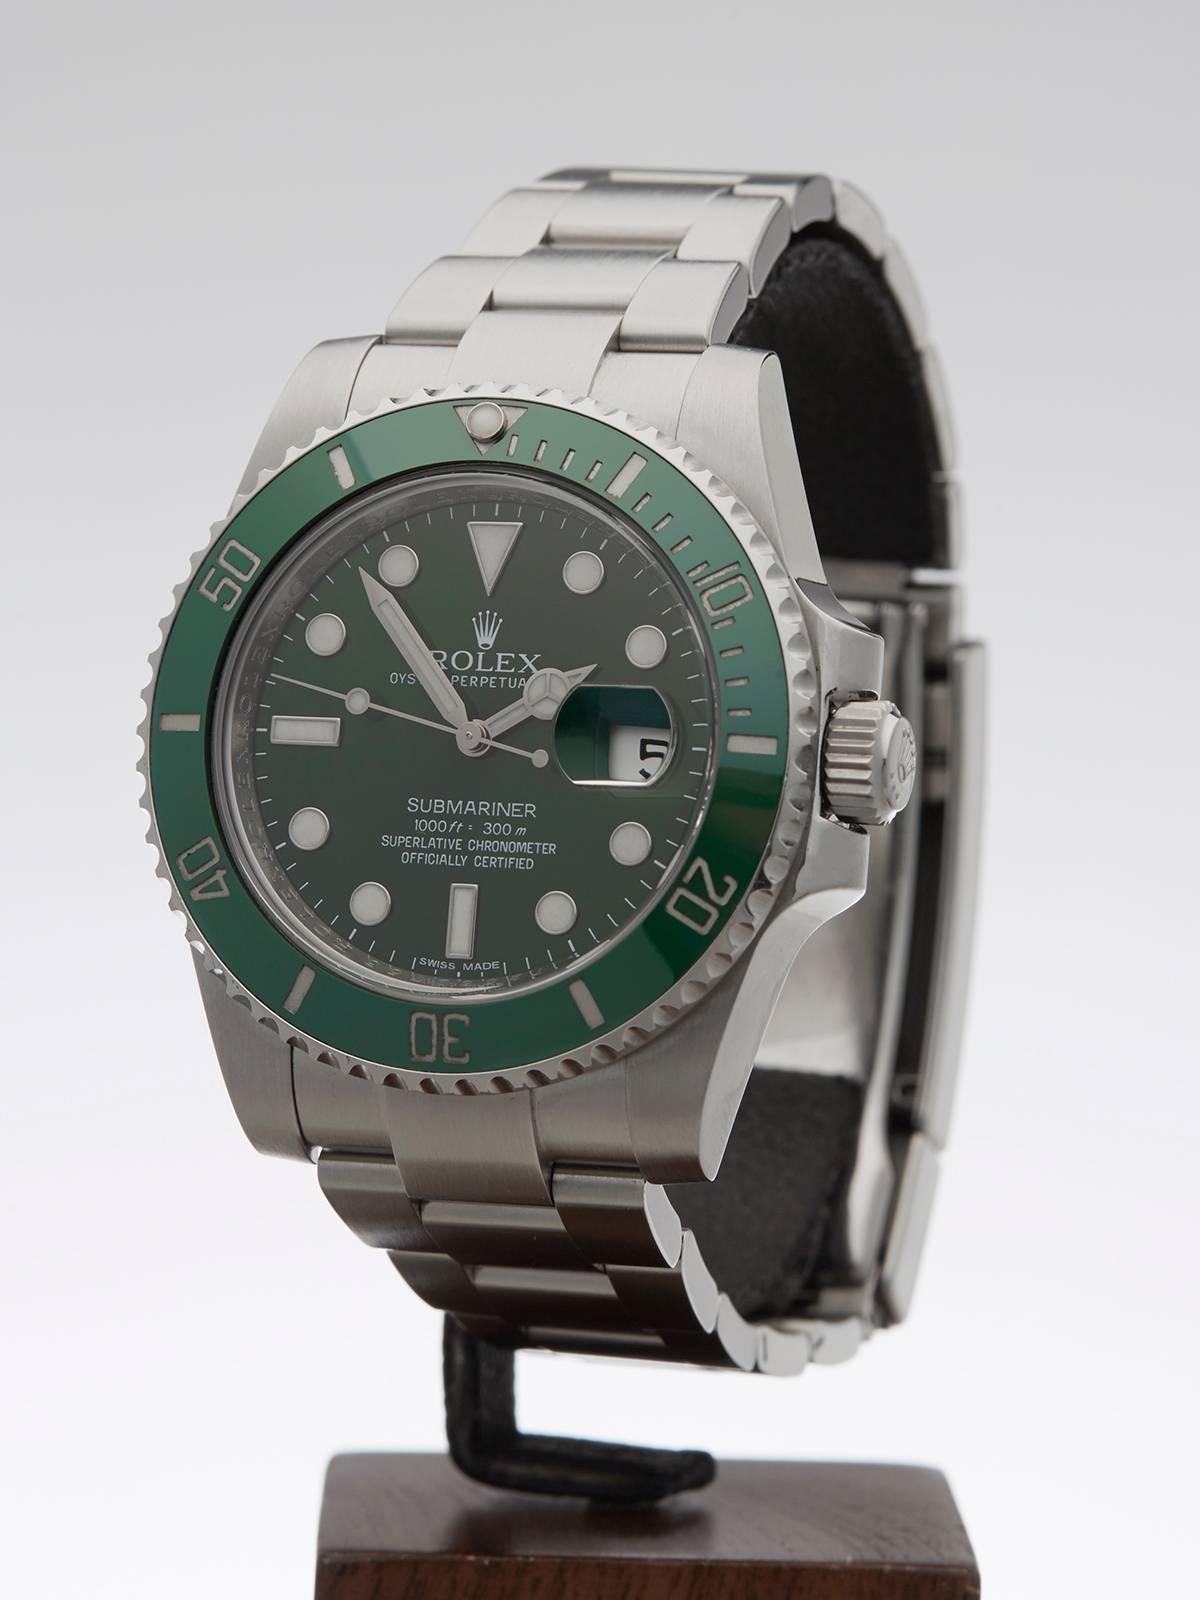 Men's Rolex Stainless Steel Submariner Green Dial Automatic Wristwatch Rev 116610LV